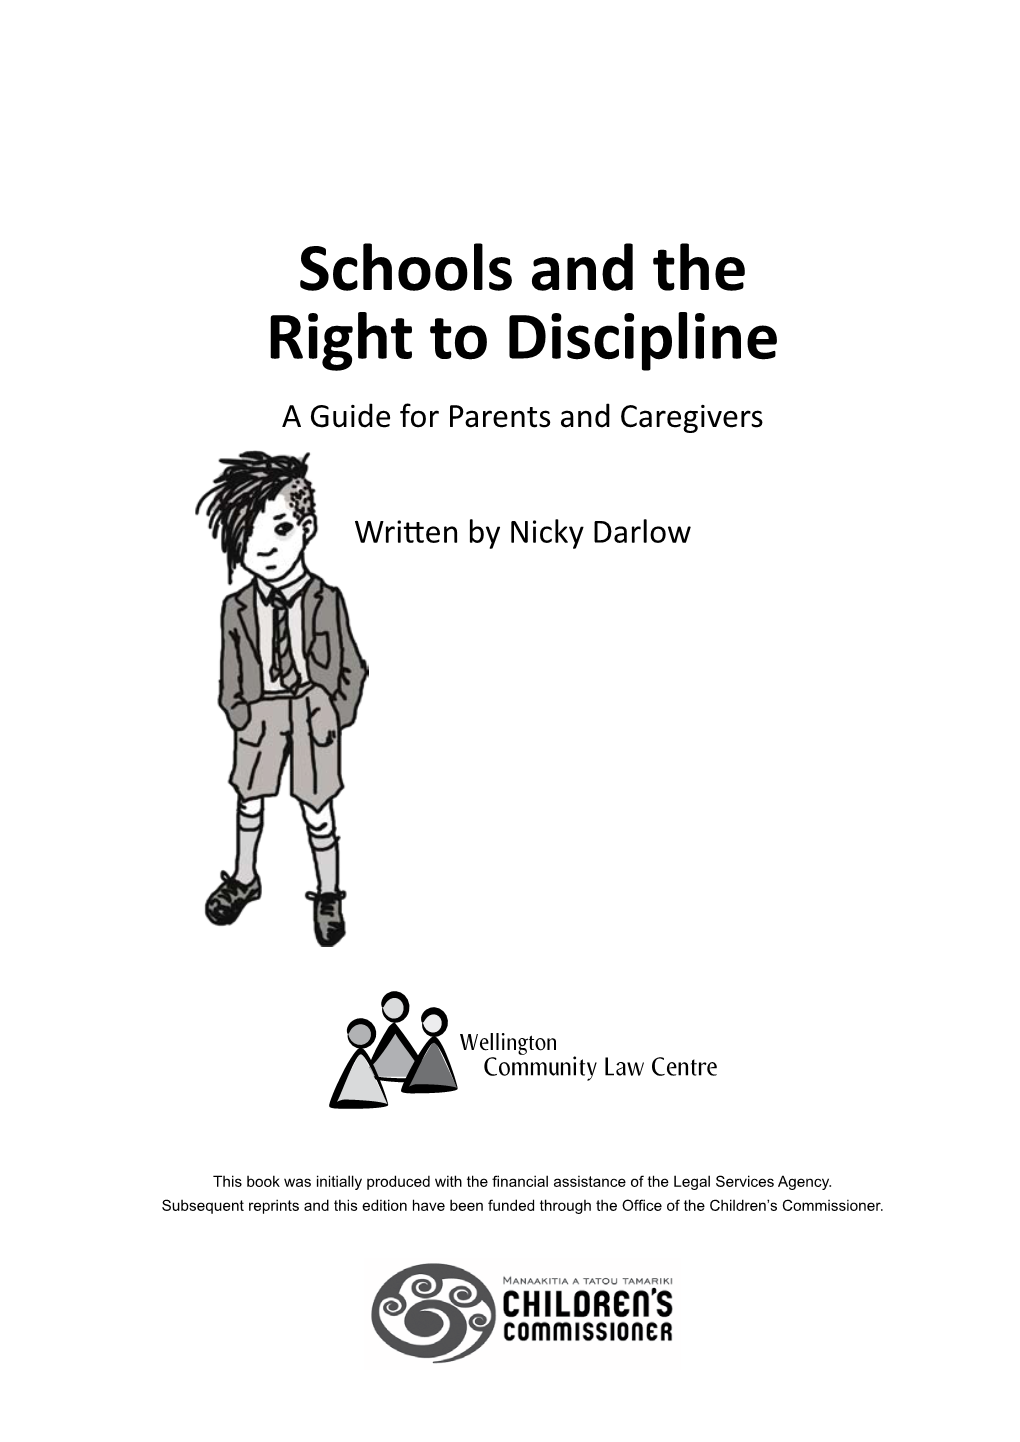 Schools and the Right to Discipline Is a Guide